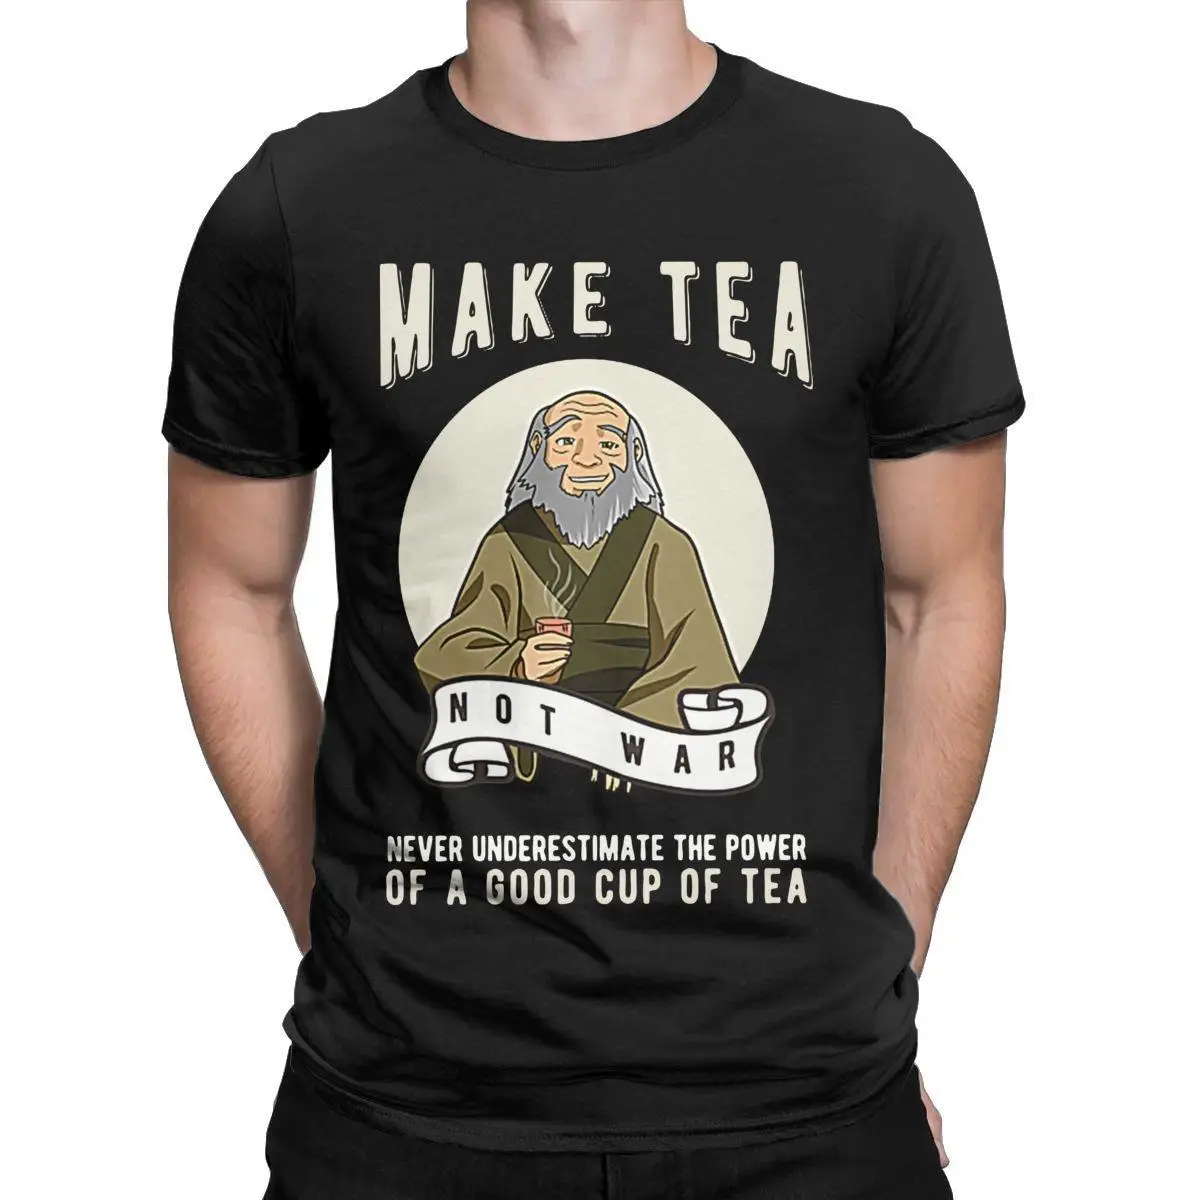 Avatar Uncle Iroh T-Shirt for Men Funny 100% Cotton Tees Round Collar Short Sleeve T Shirts Plus Size Tops